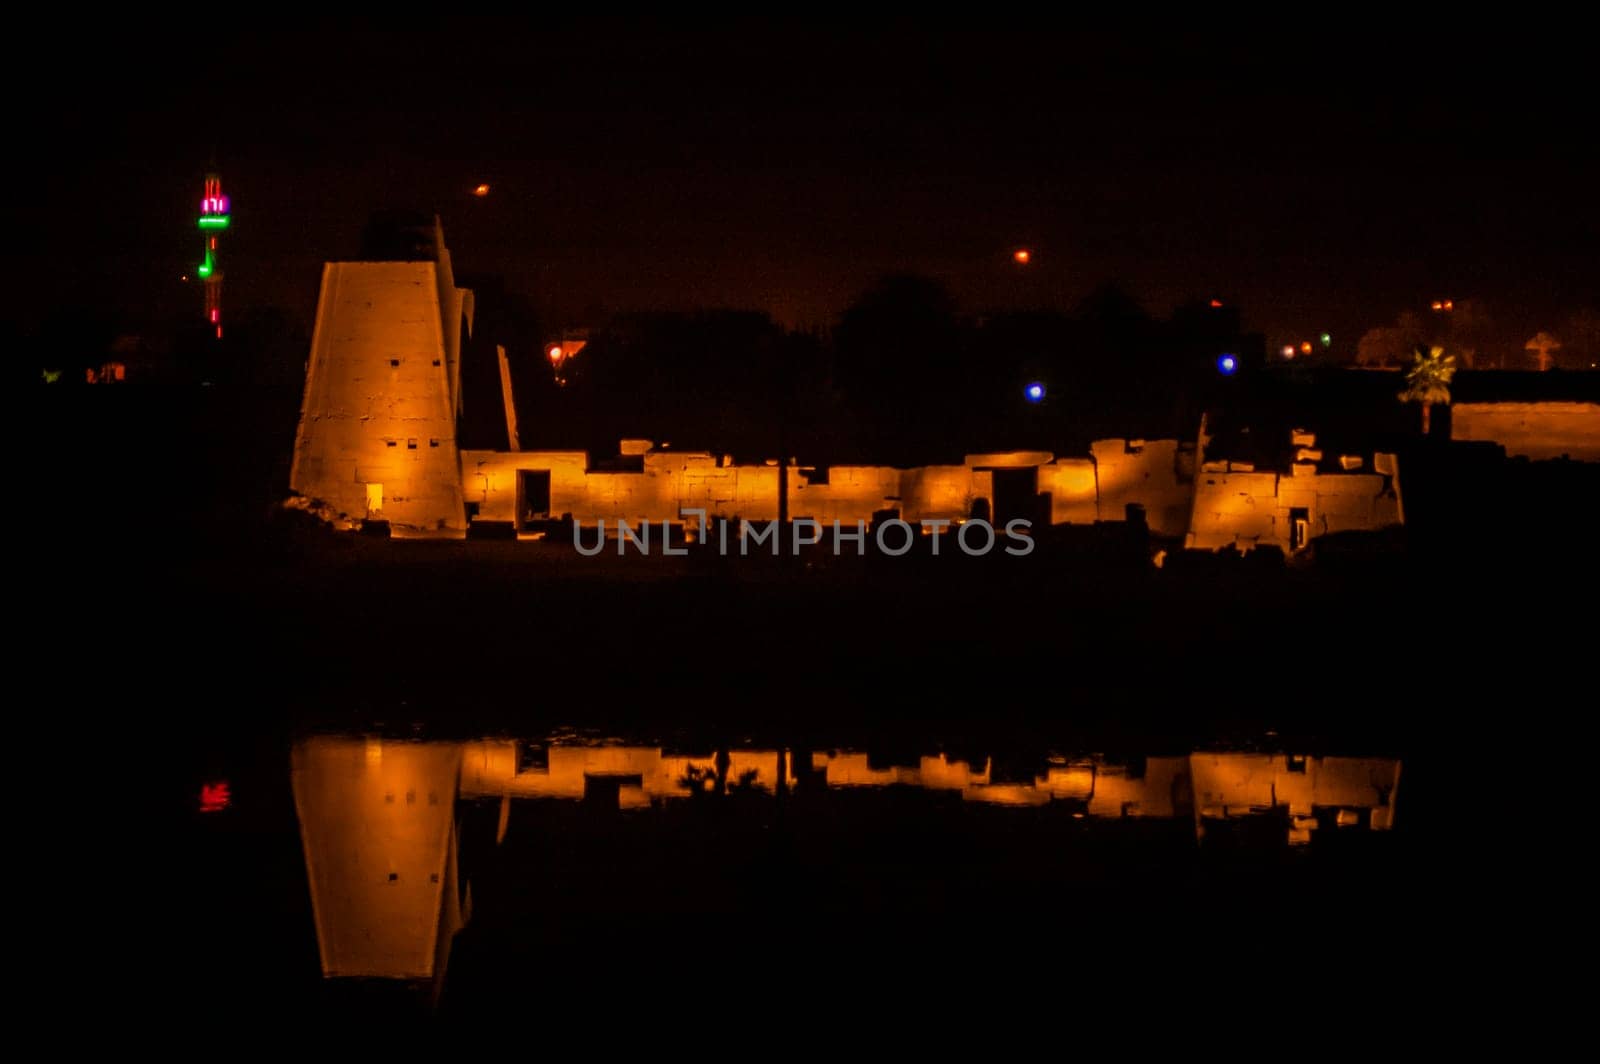 Karnak complex by night by Giamplume